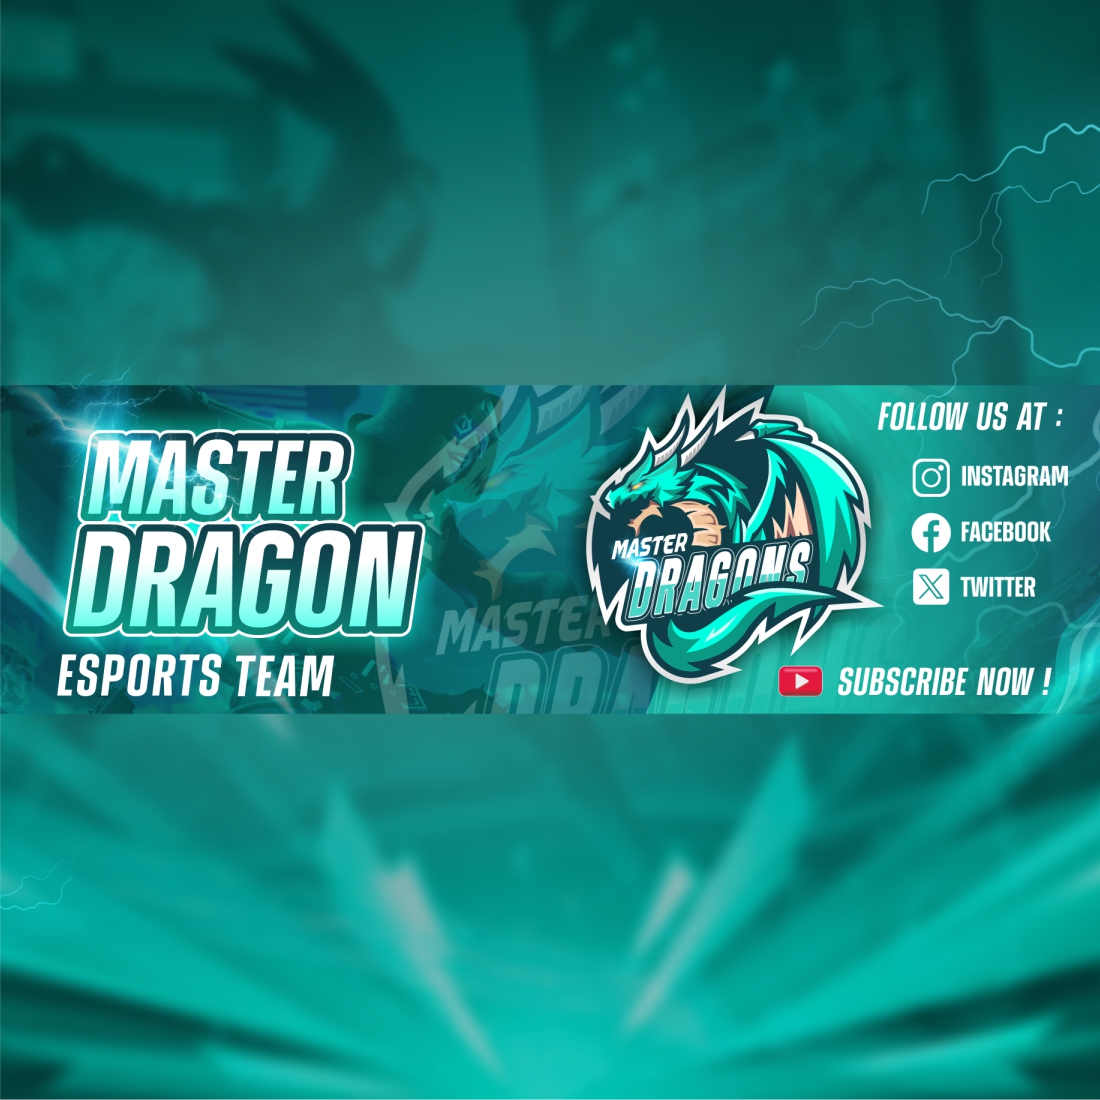 Attractive GAMING LOGO and BANNER named "MASTER DRAGONS" preview image.